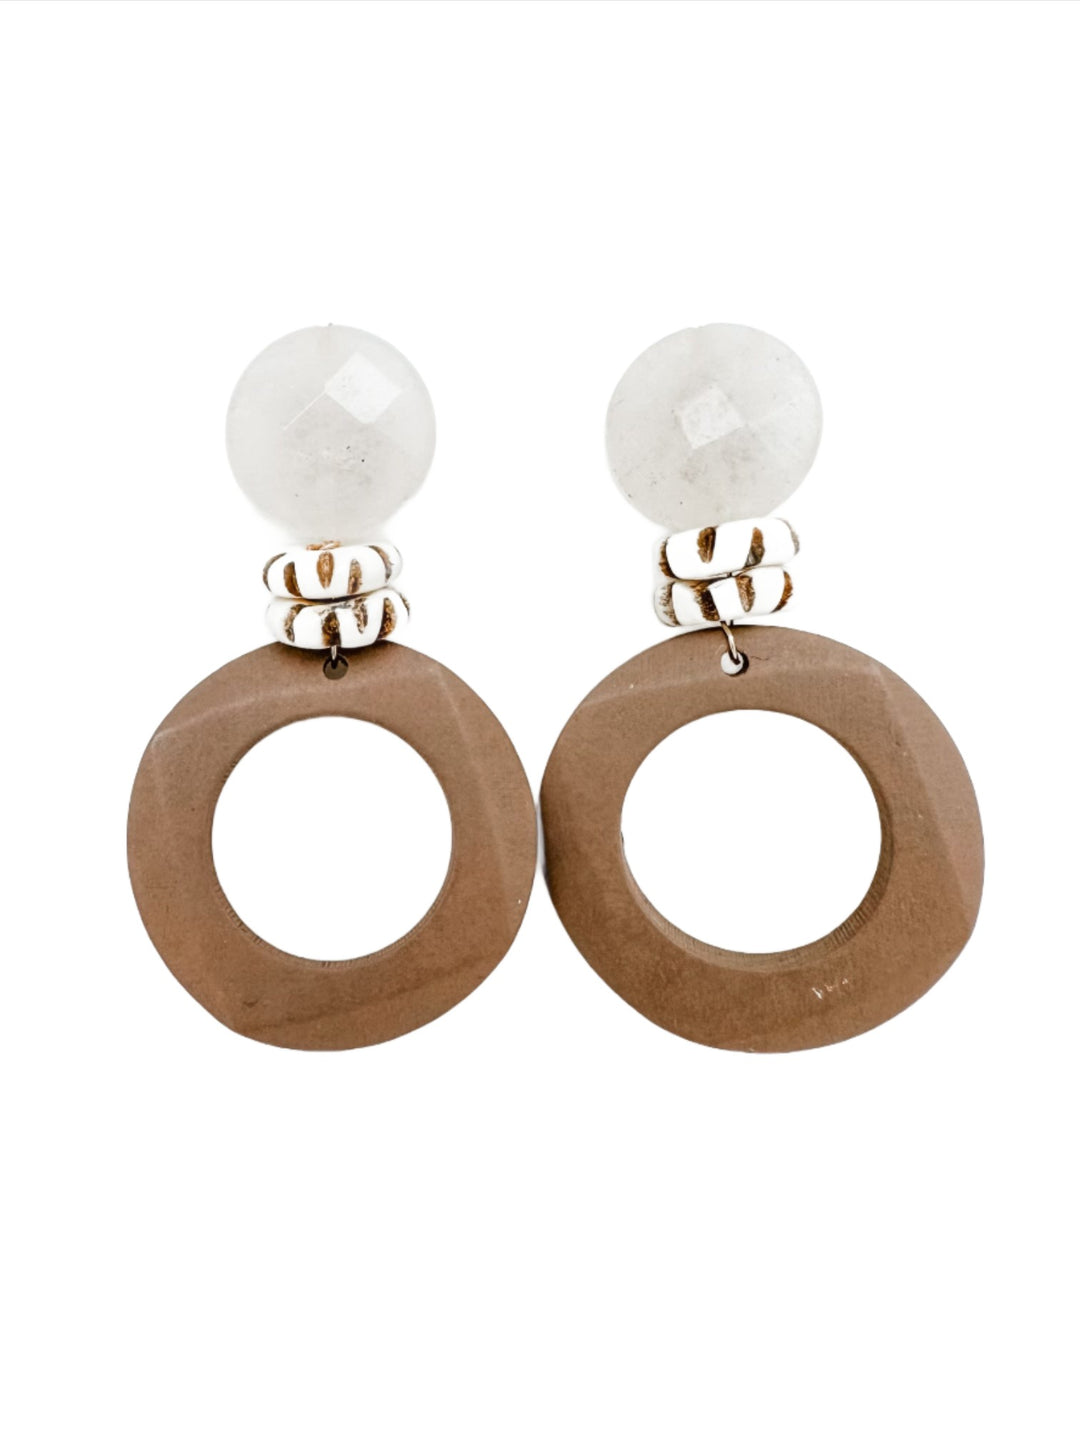 Brown wood earring with rose quartz post